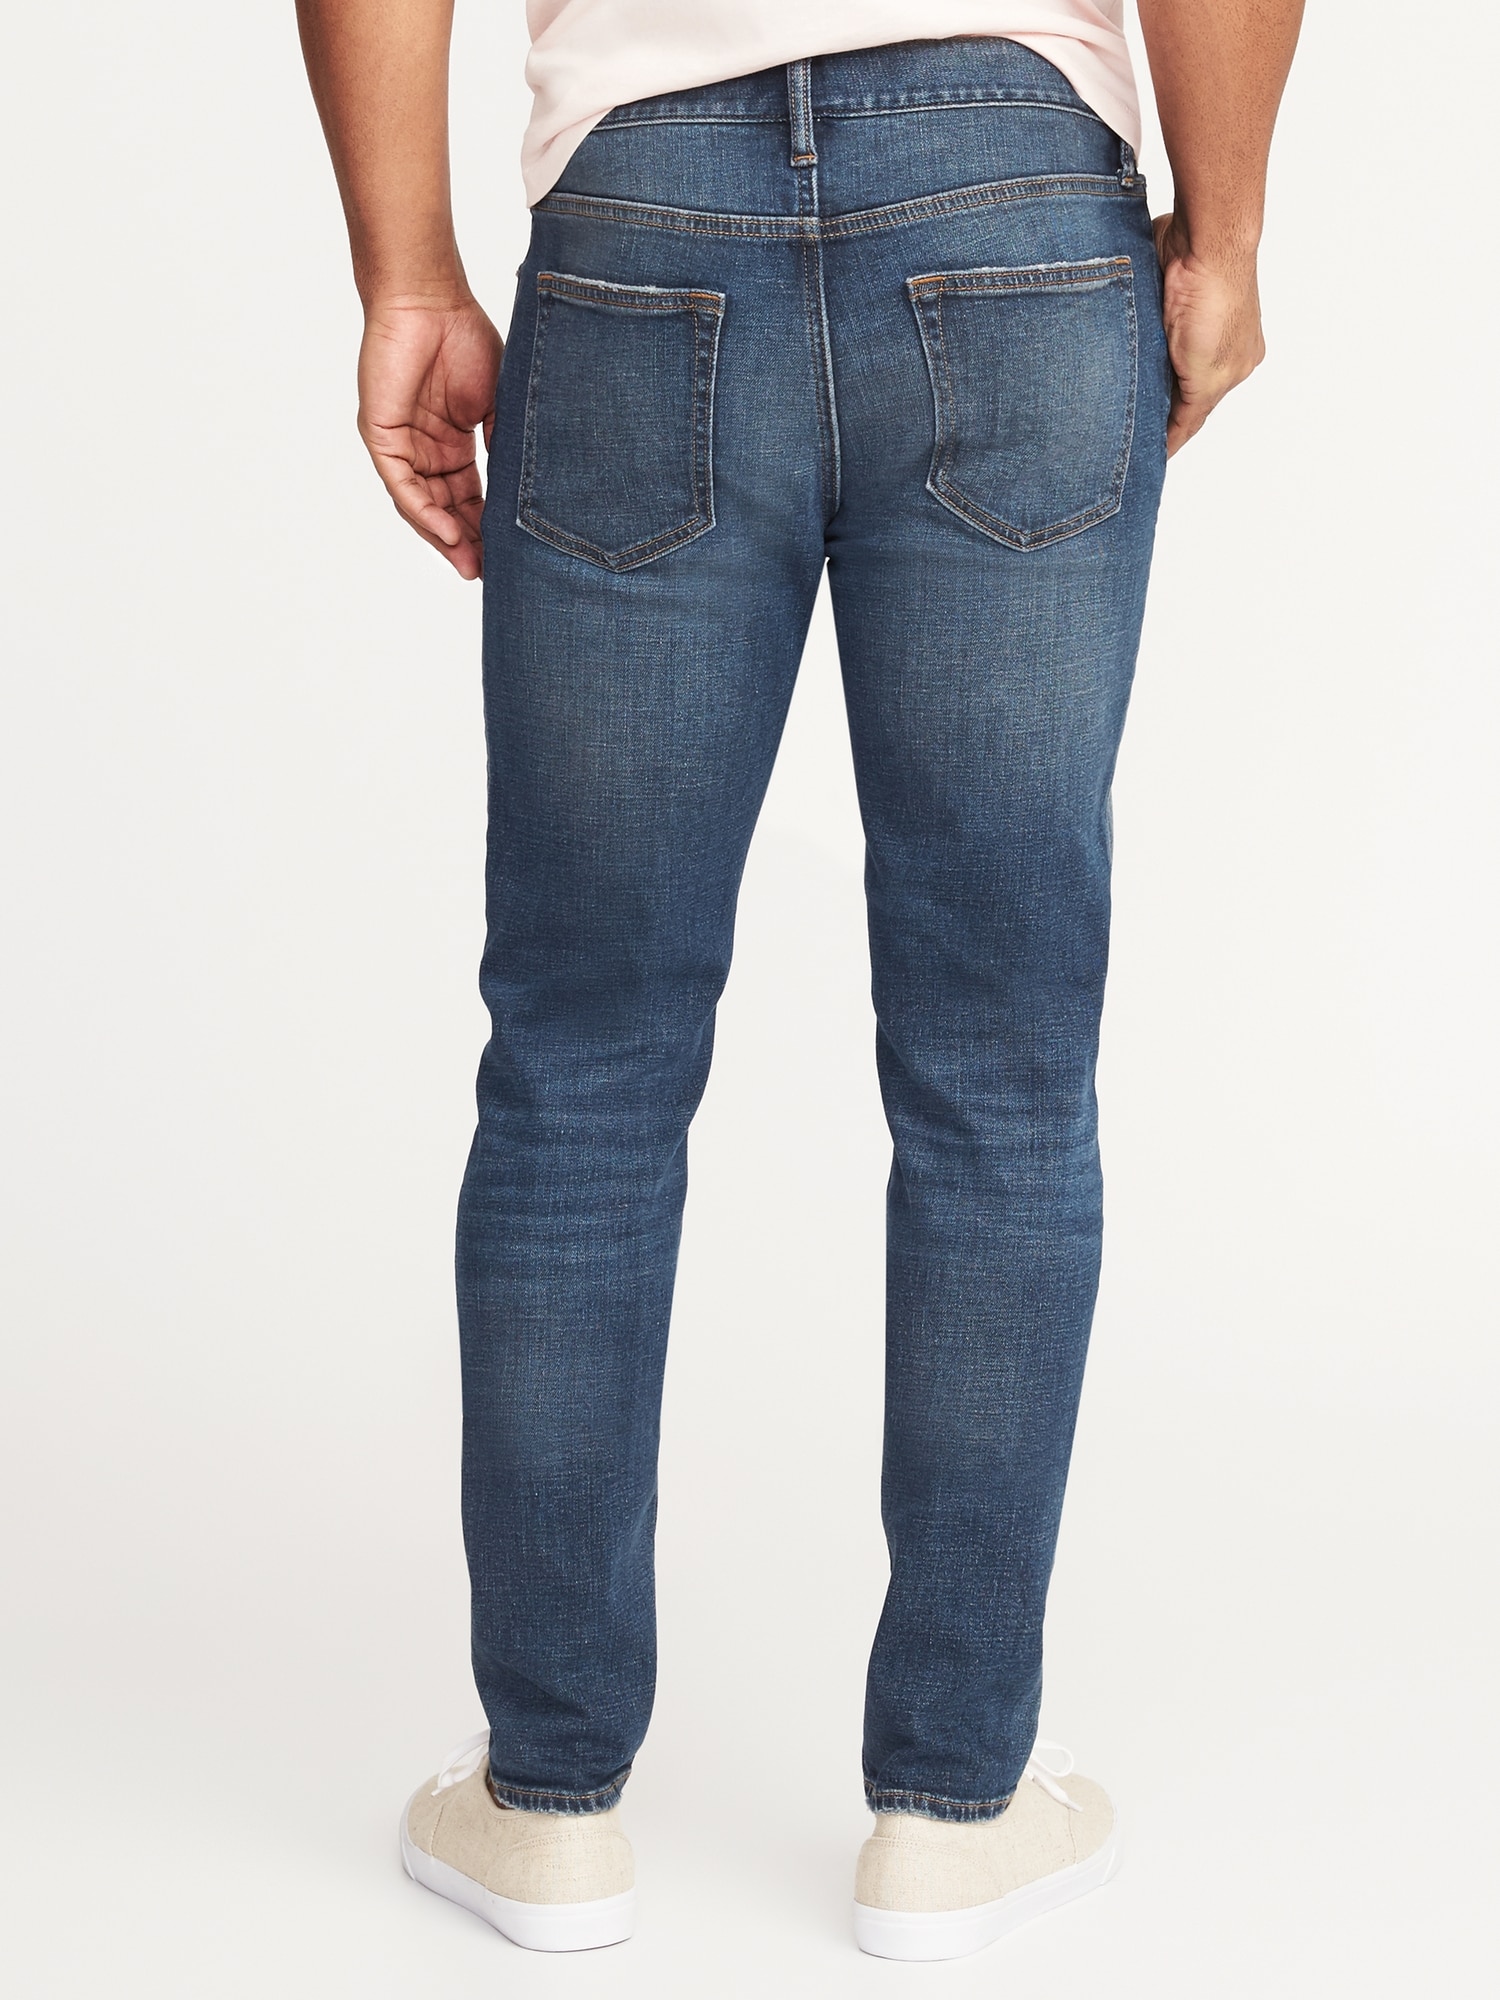 Relaxed Slim Taper Built-In Flex Jeans | Old Navy